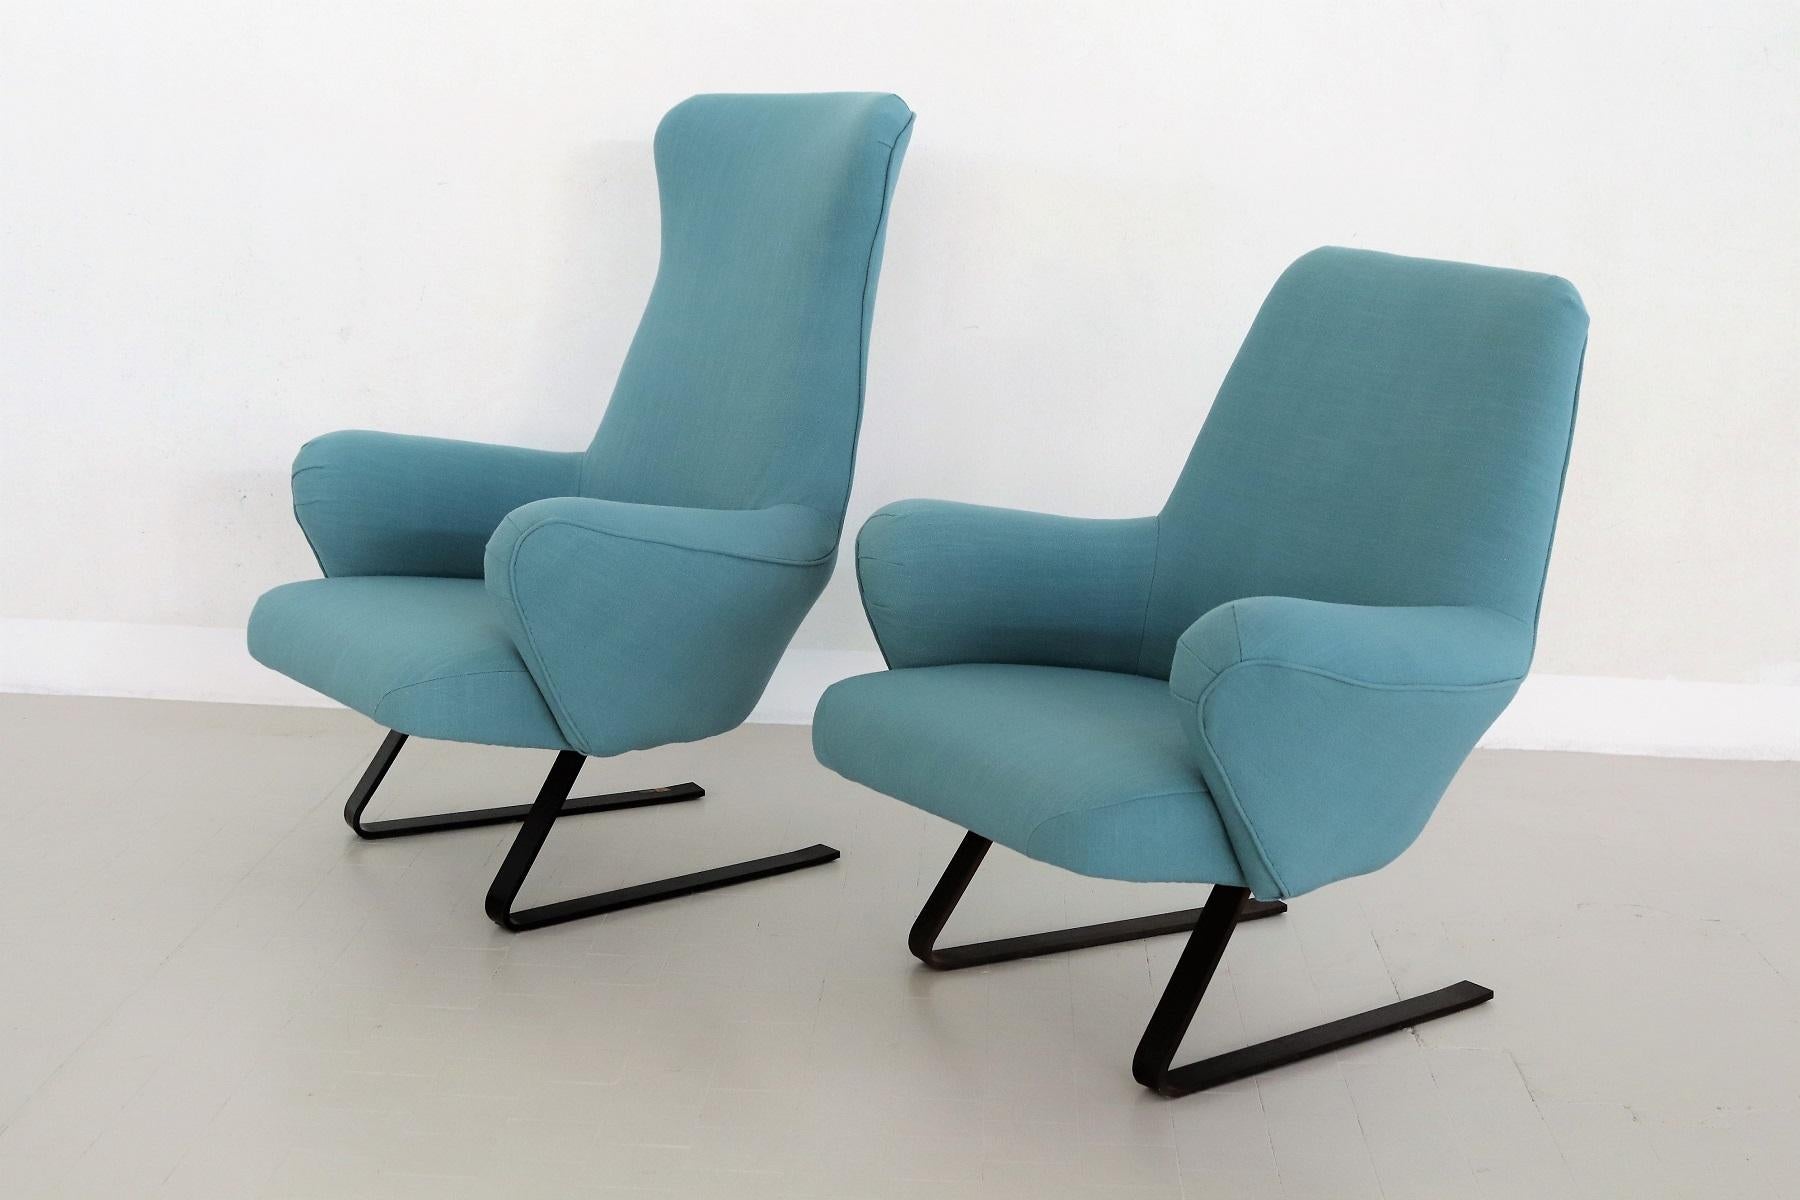 Steel Italian Midcentury Rocking Armchairs by Gianni Moscatelli for Formanova, 1960s